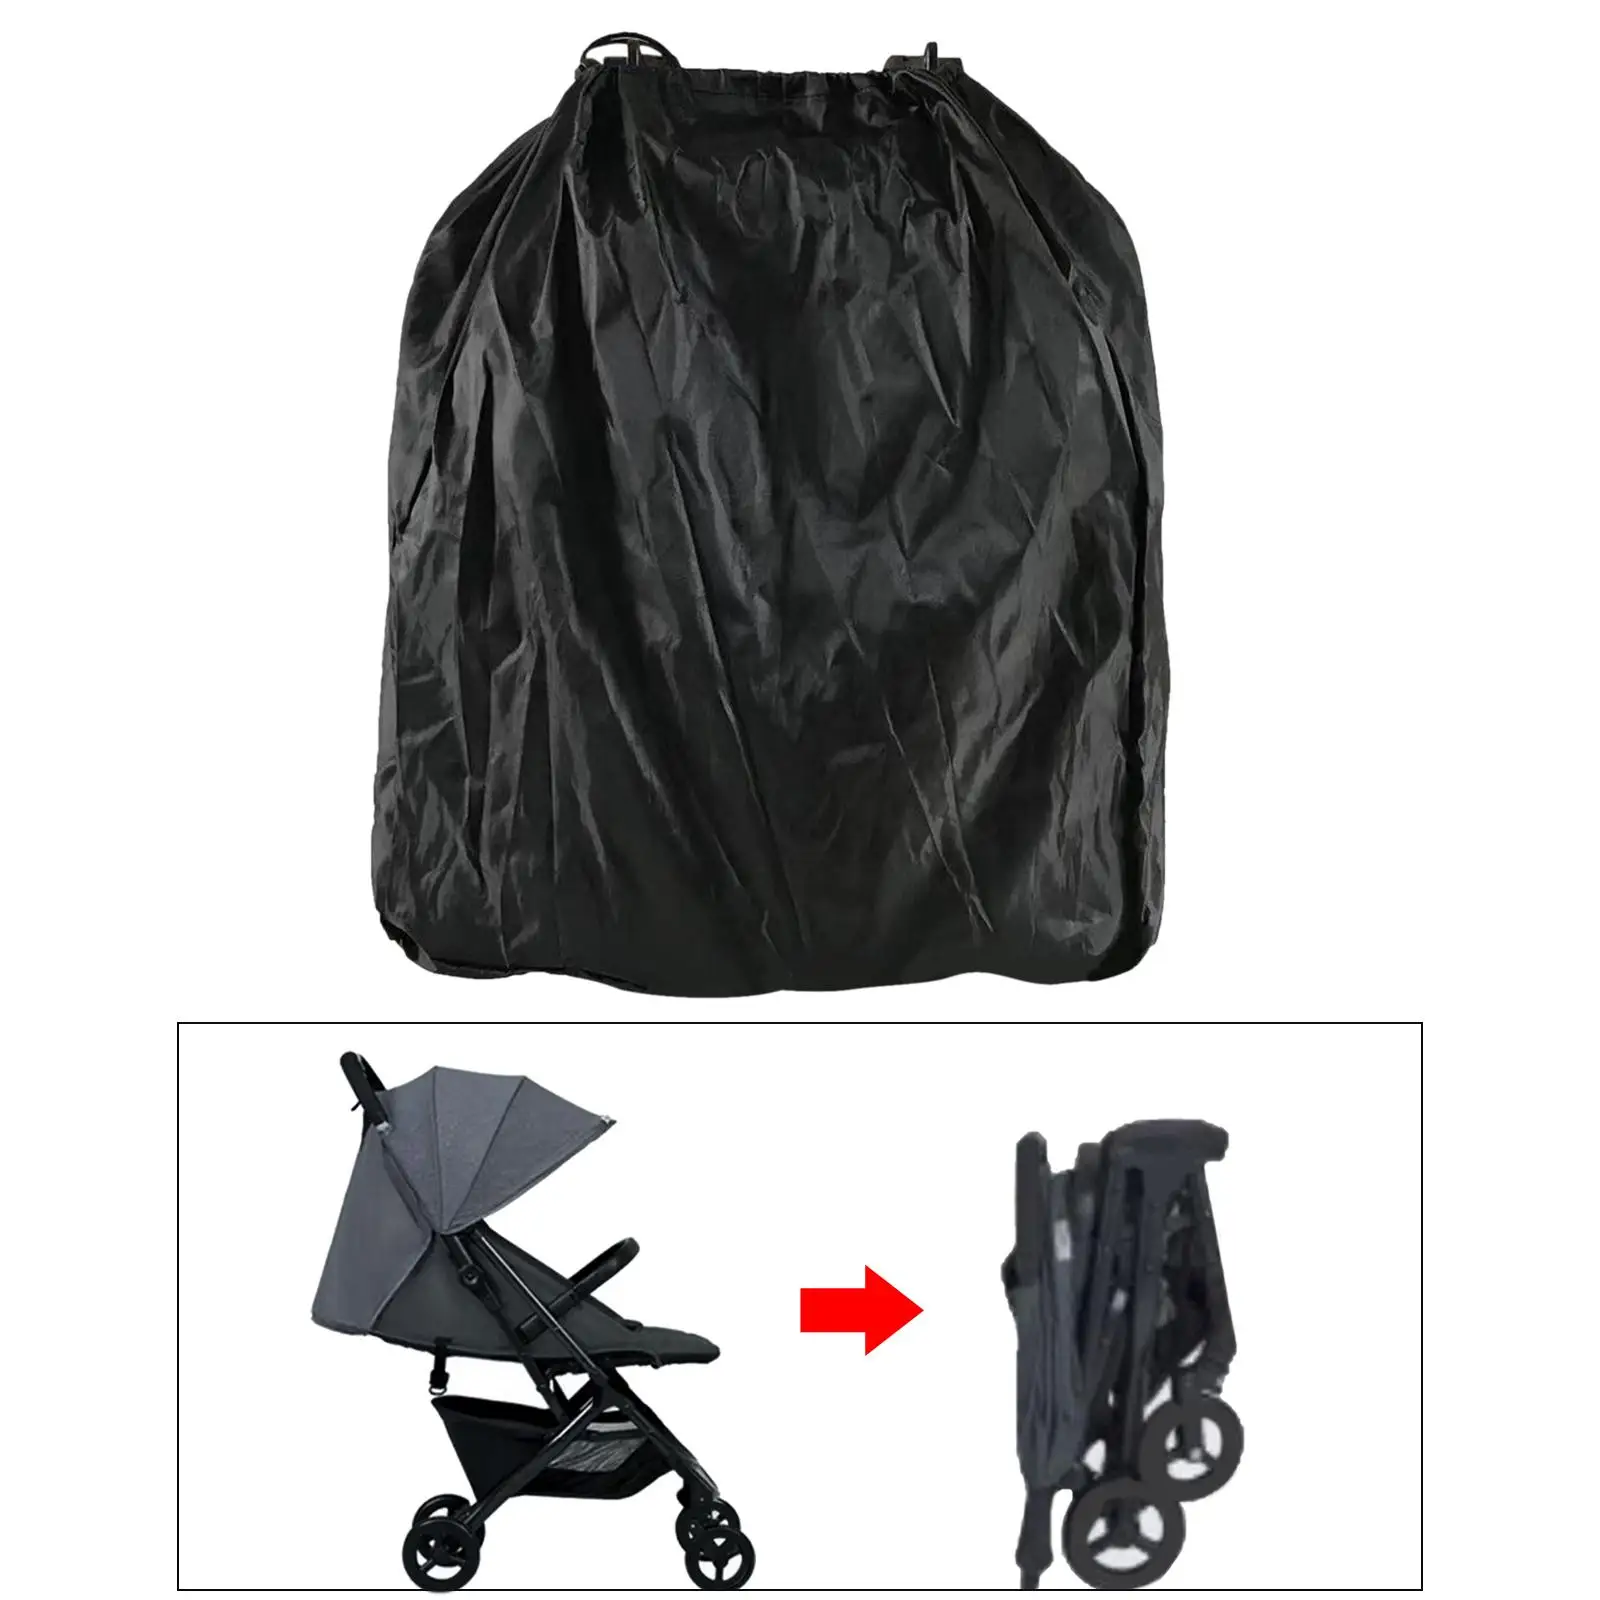 Travel Stroller Bag Carrying Oxford Cloth Drawstring Closure Umbrella Stroller Travel Bag for Airplane Gate Check Airports